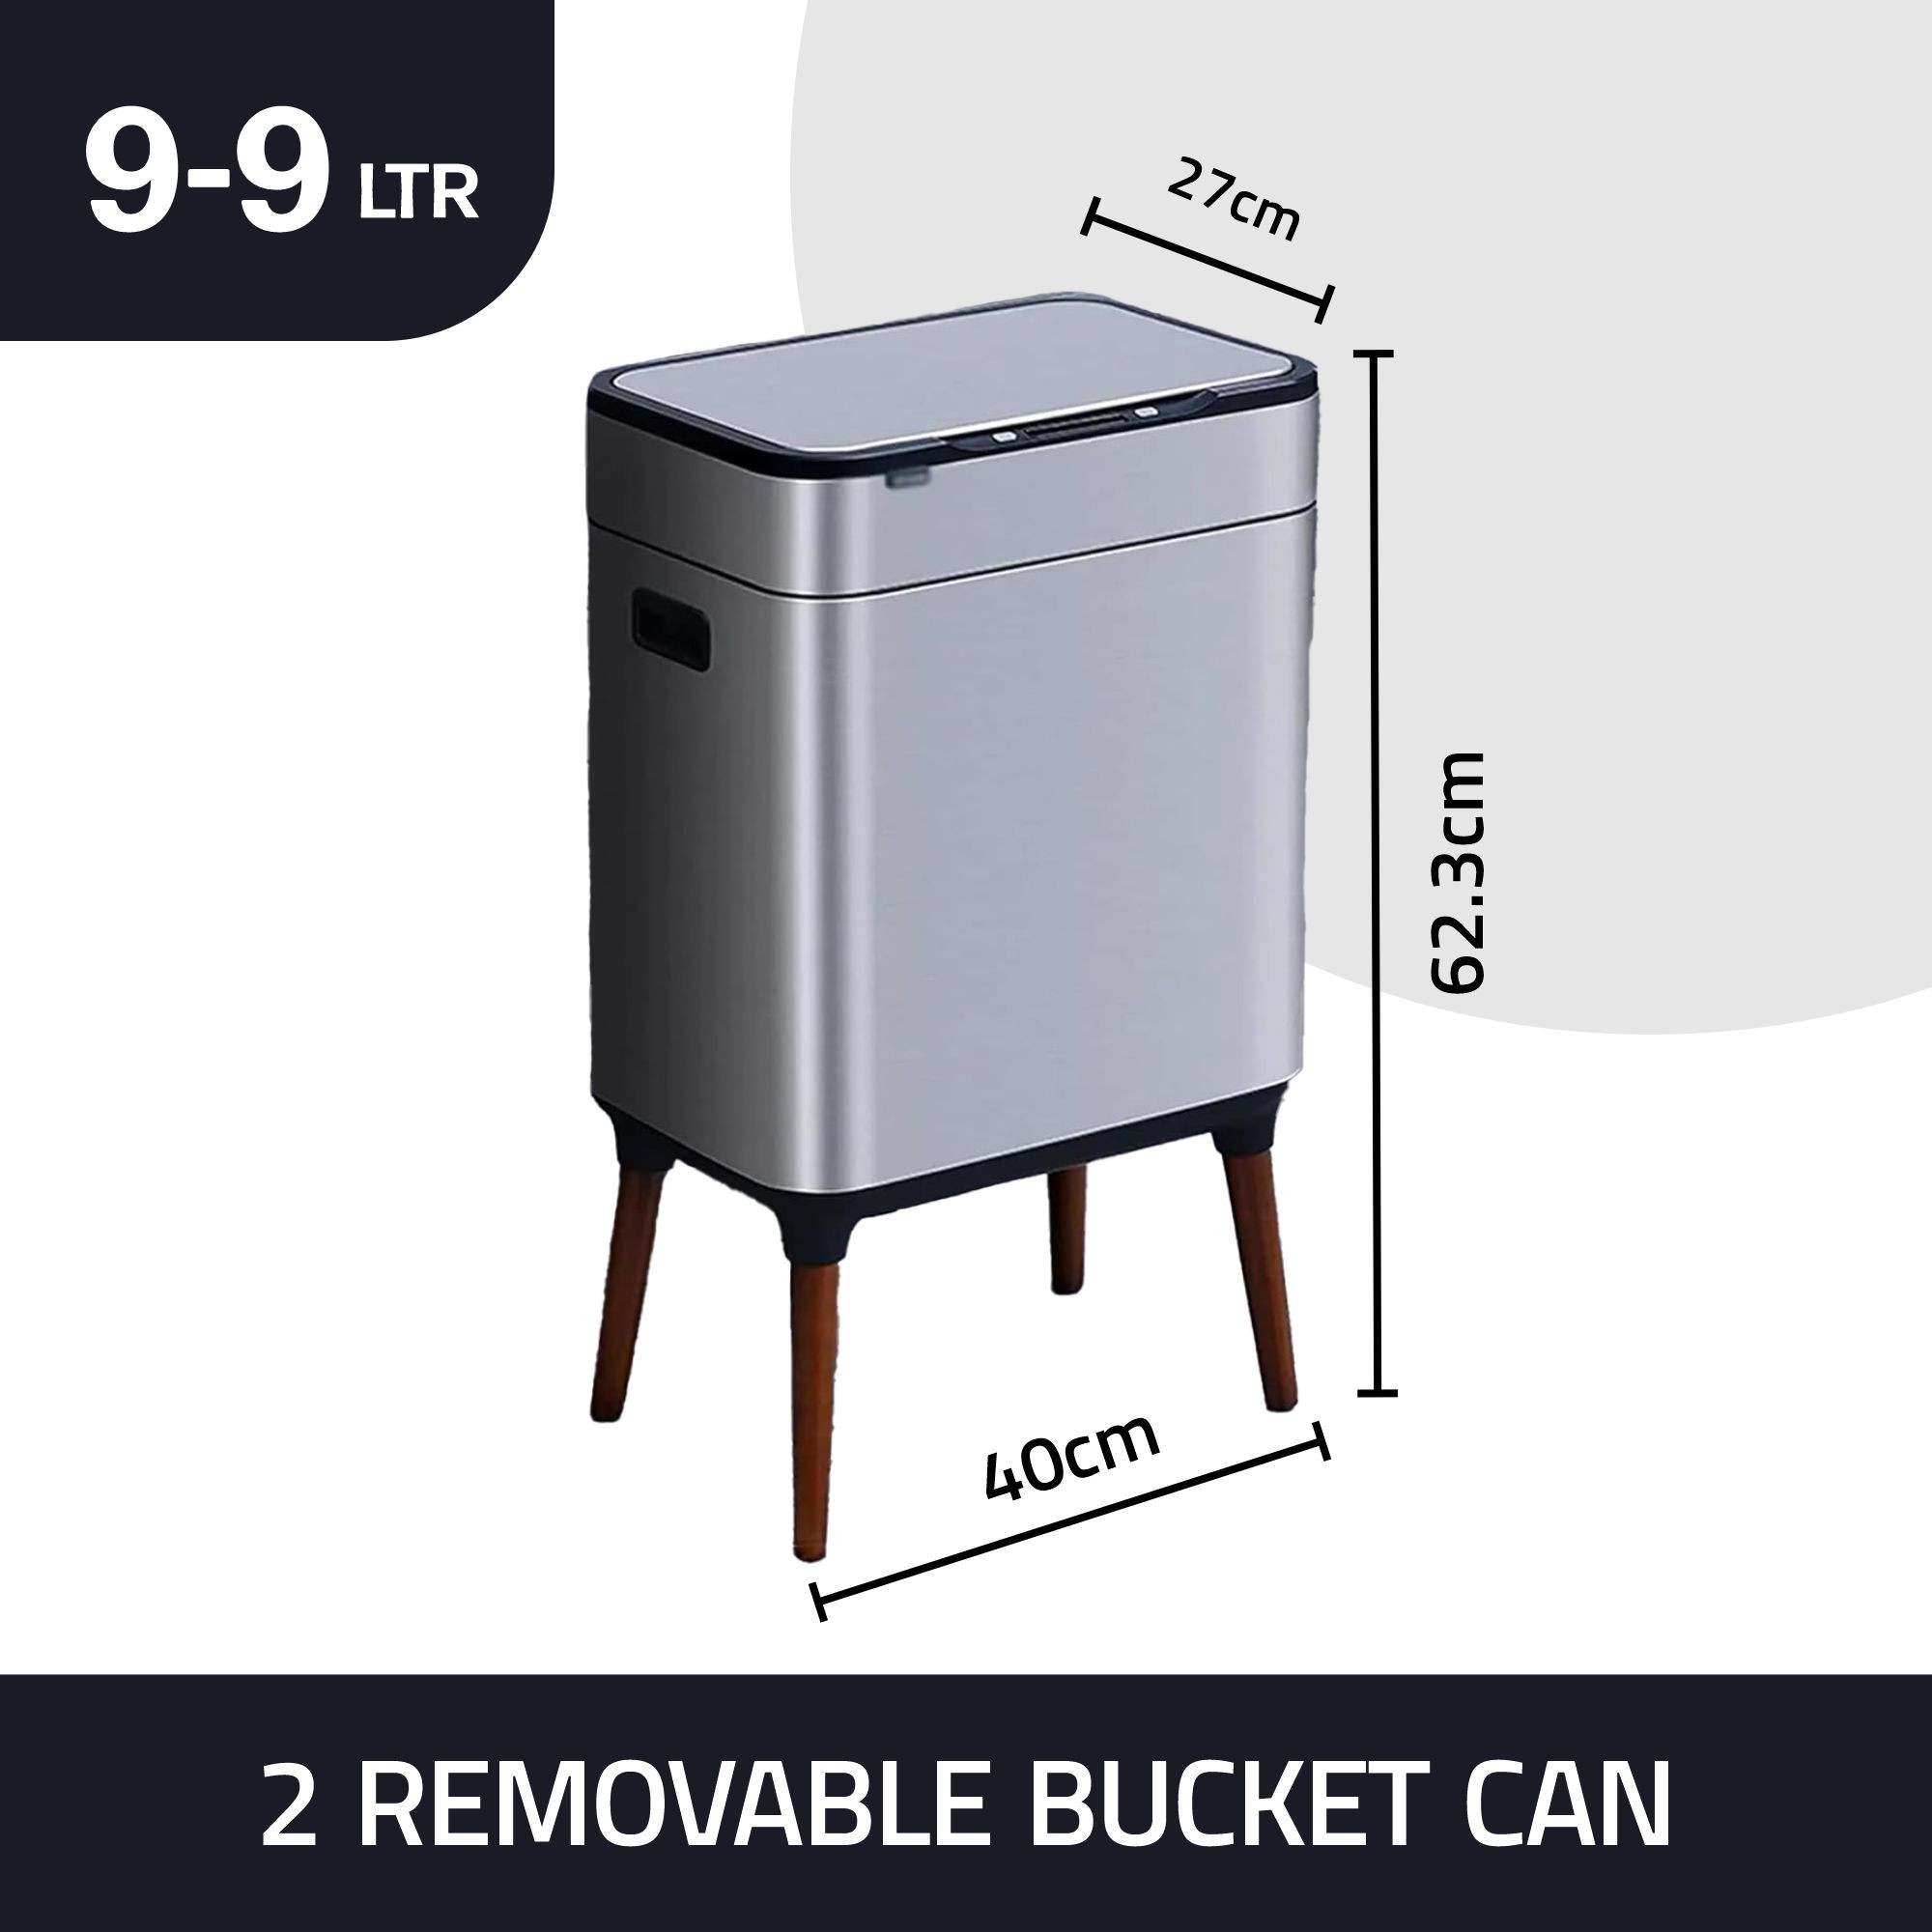 Kuber Industries Sensor Dustbin | Dual Compartment Sensor Dustbin | Touchless Trash Can | Smart Dustbin for Bedroom-Office-Living Room | 2 Removable Bucket Can | YW-5522 | 9 LTR | Silver